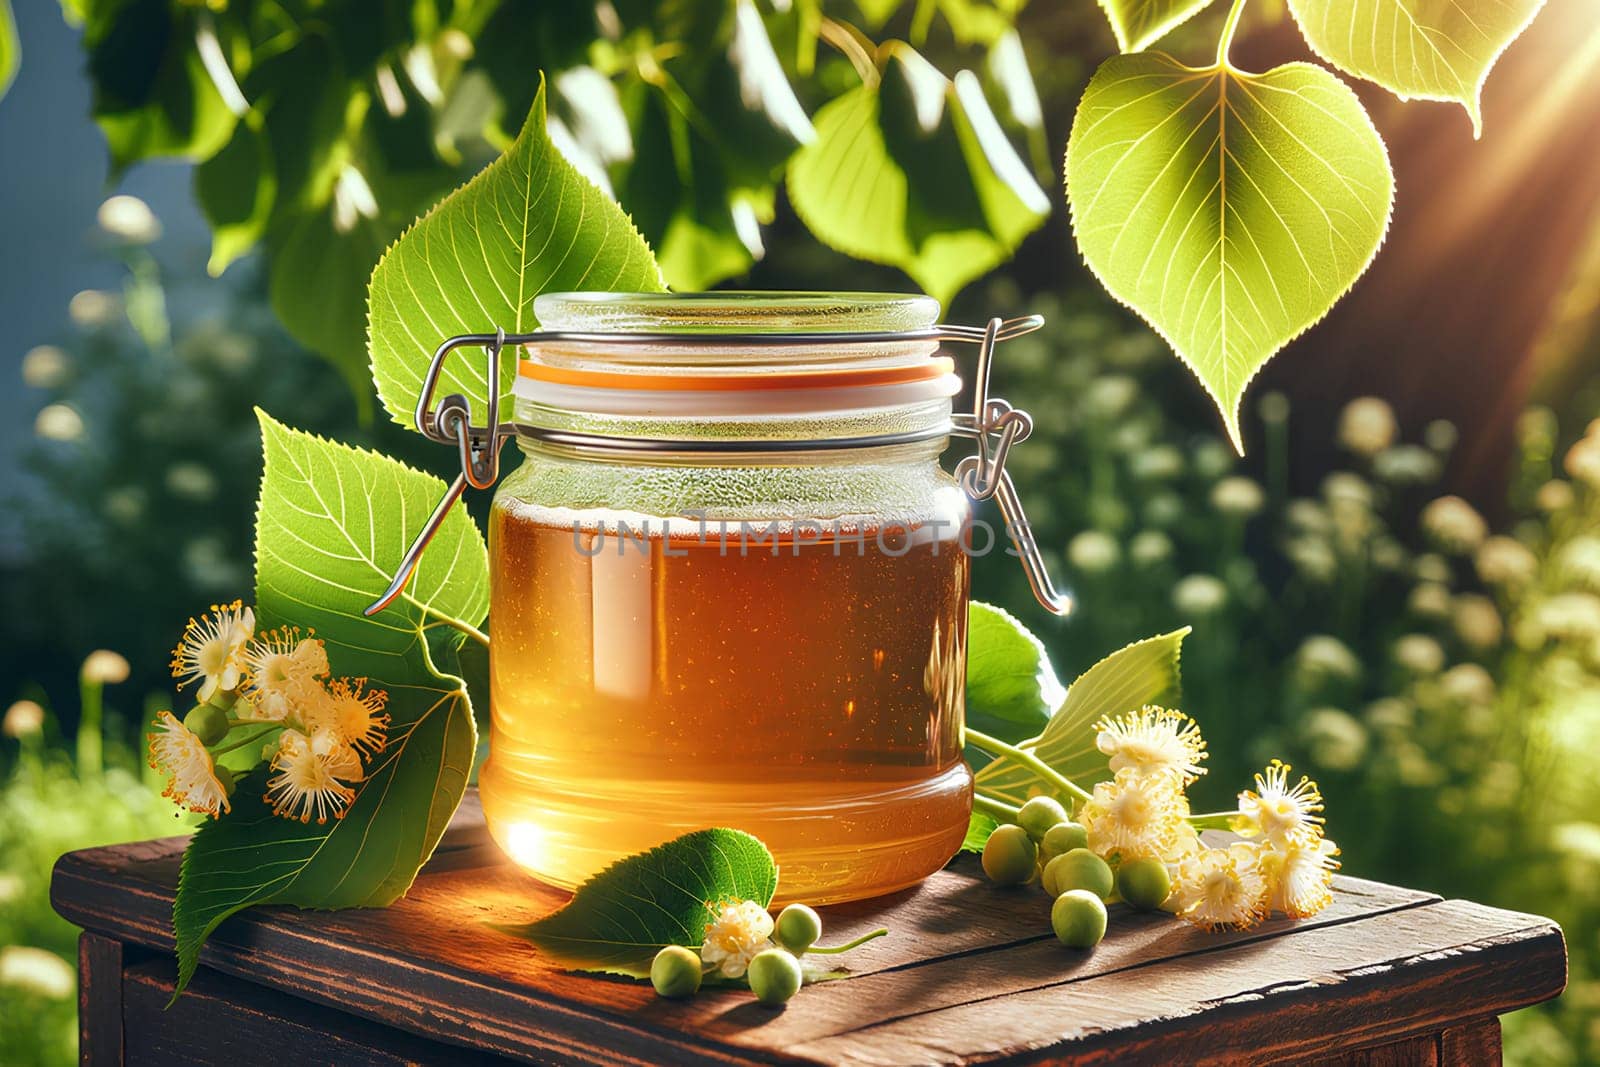 A glass jar of linden honey on a wooden table under a blooming linden tree in the garden by Annado